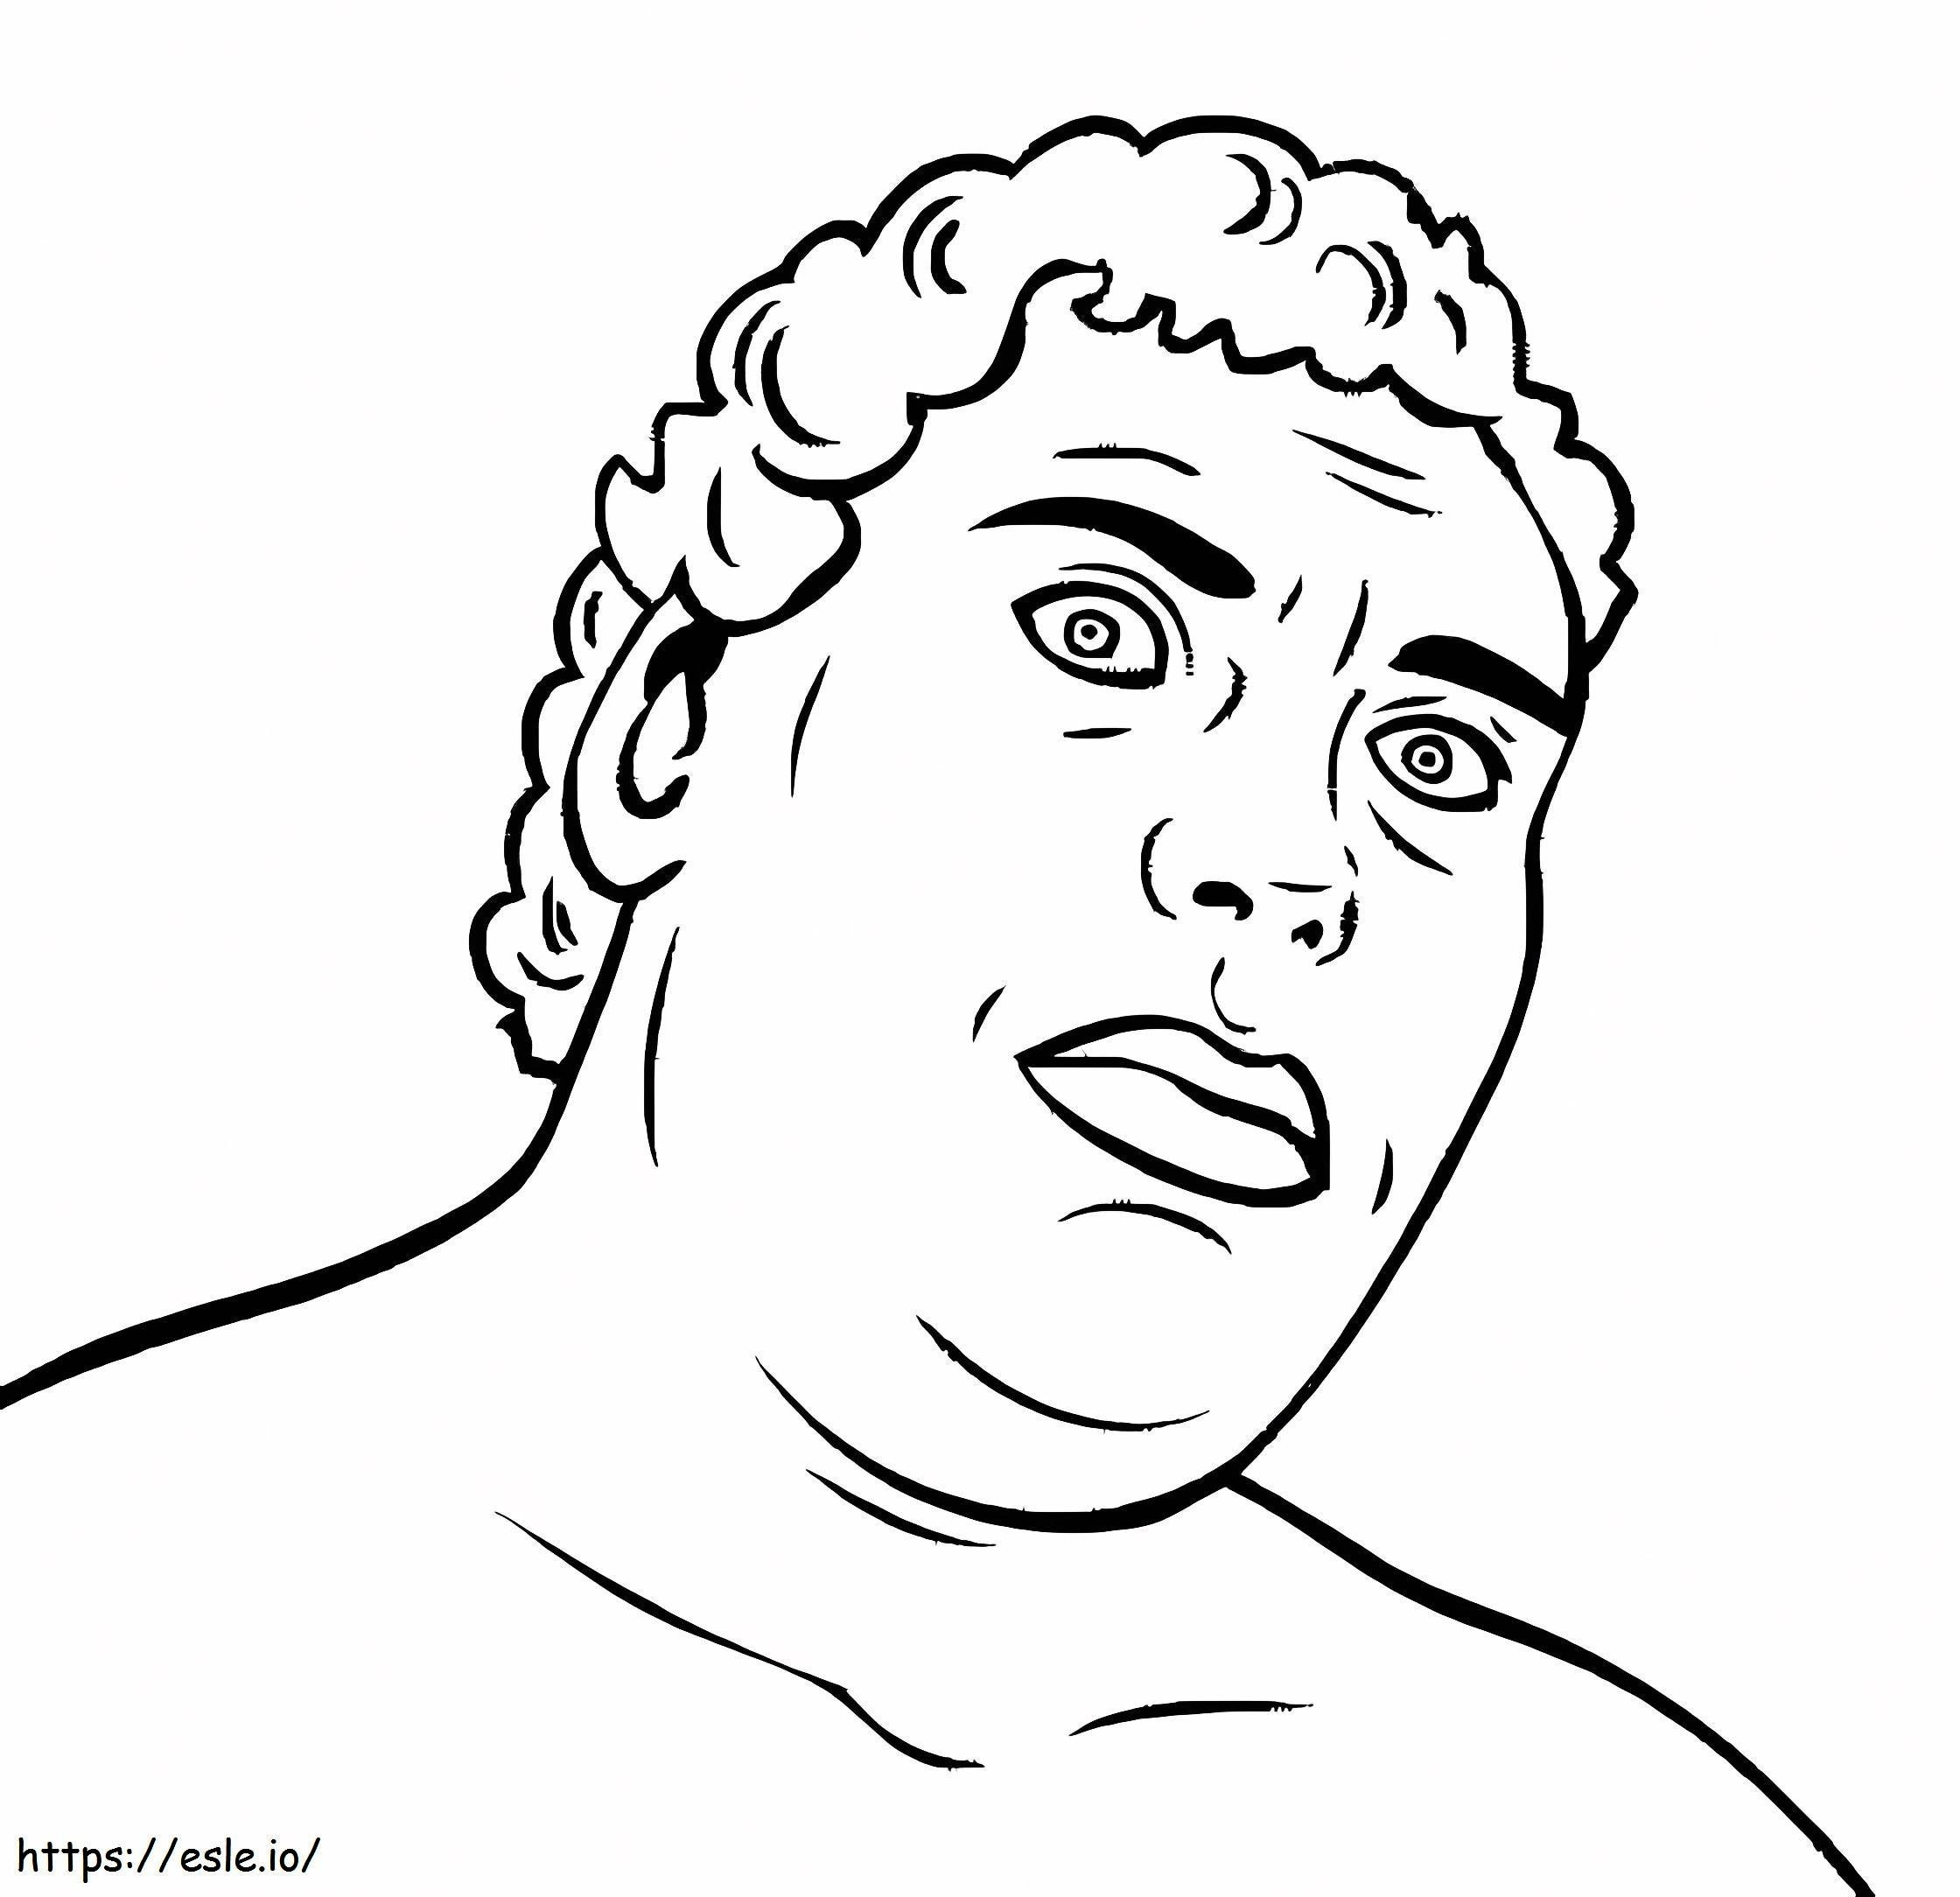 Andre The Giant coloring page